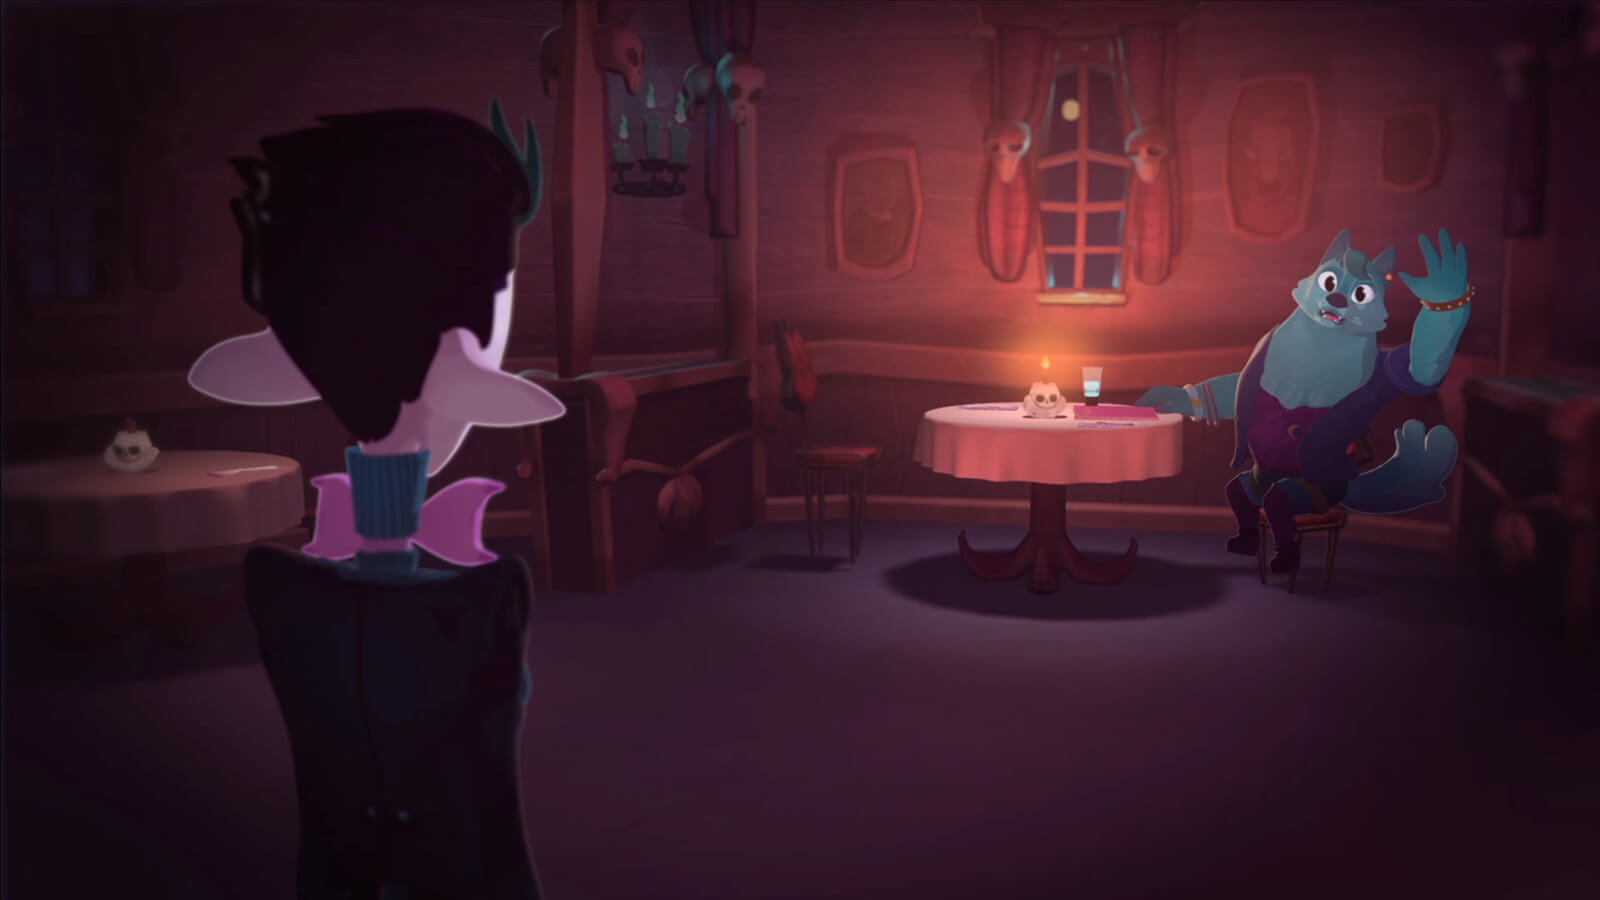 A blue werewolf in purple clothing leans on a candlelit table, looking out a window flanked by red curtains with skulls above